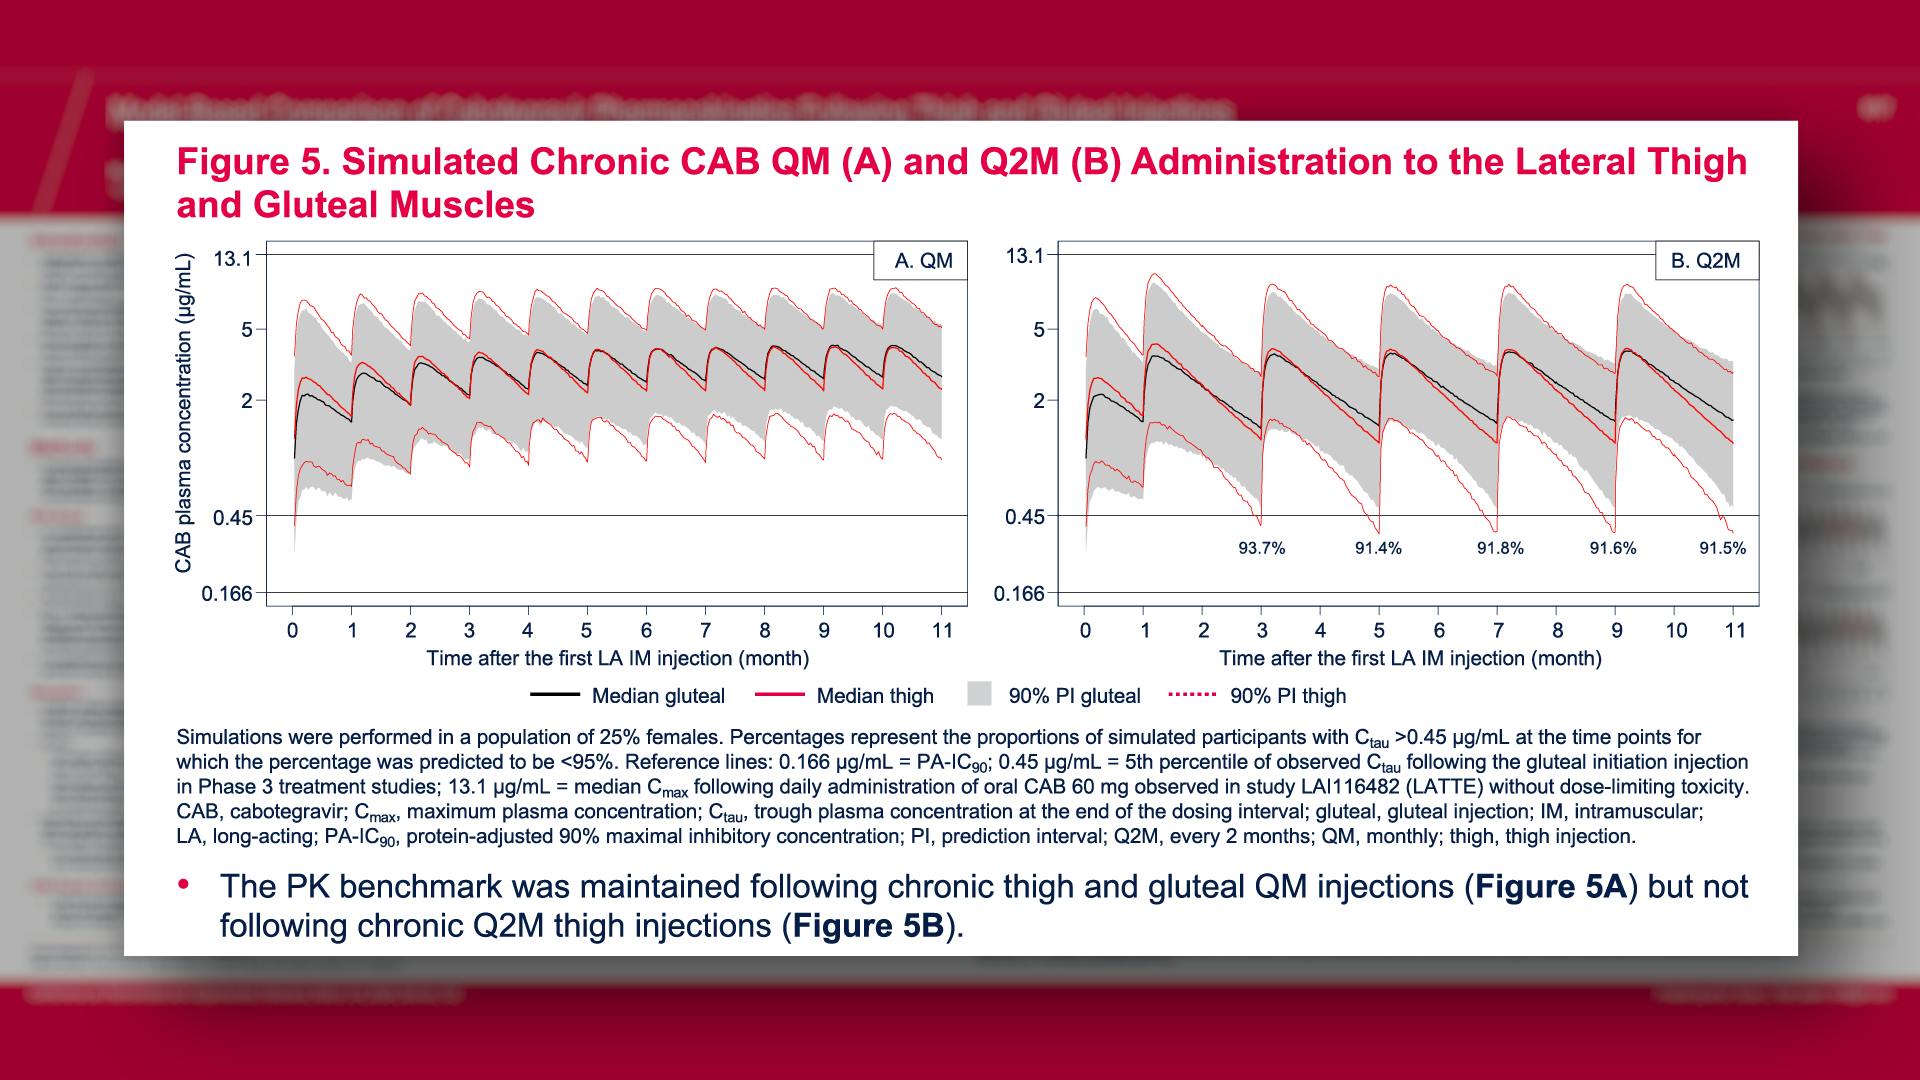 Simulated Chronic CAB QM (A) and Q2M (B) Administration to the Lateral Thigh and Gluteal Muscles